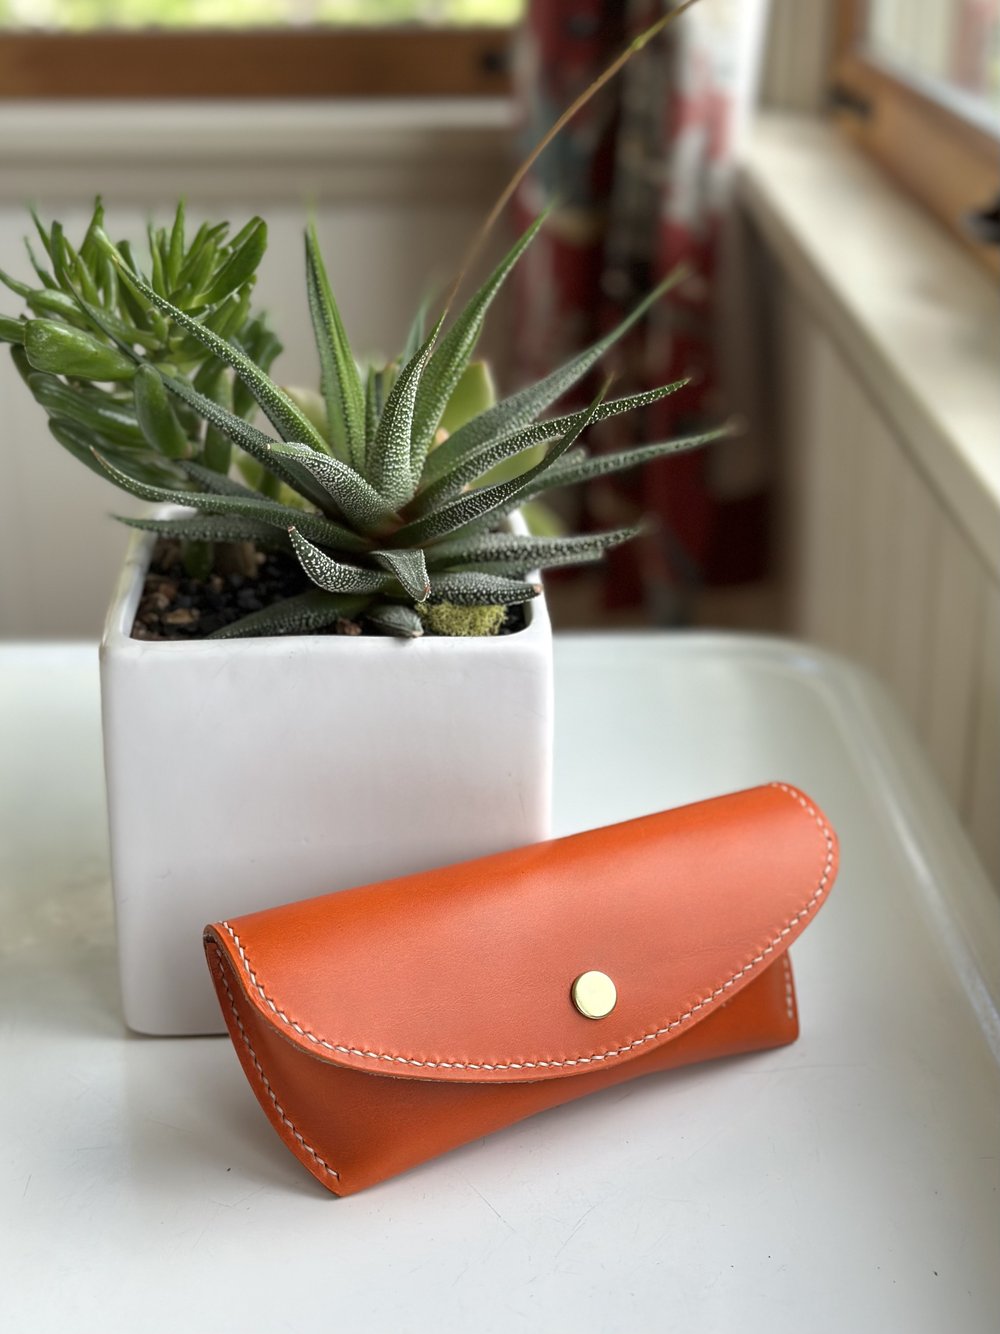 Hand-stitched Red Envelope Clutch in soft Italian leather — Sunshine & Rain